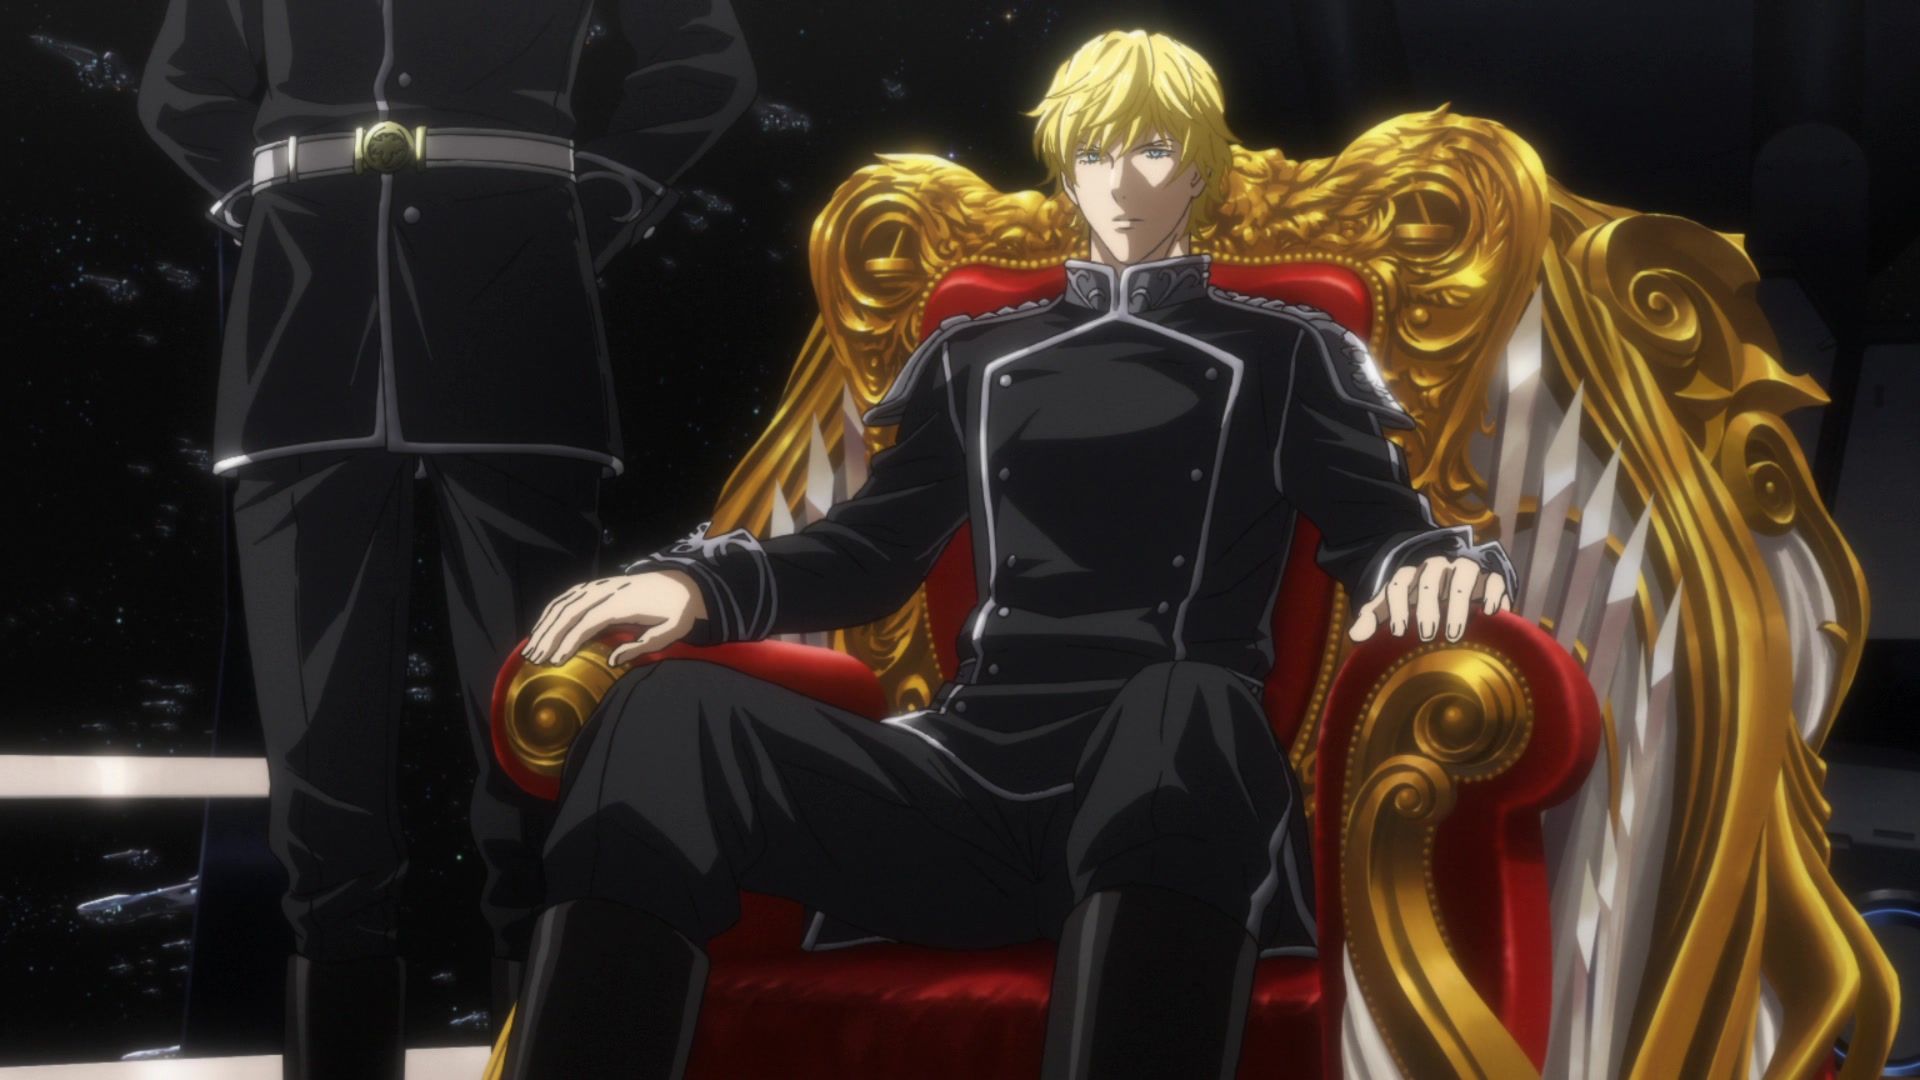 Legend of the Galactic Heroes: Die Neue These Episode In